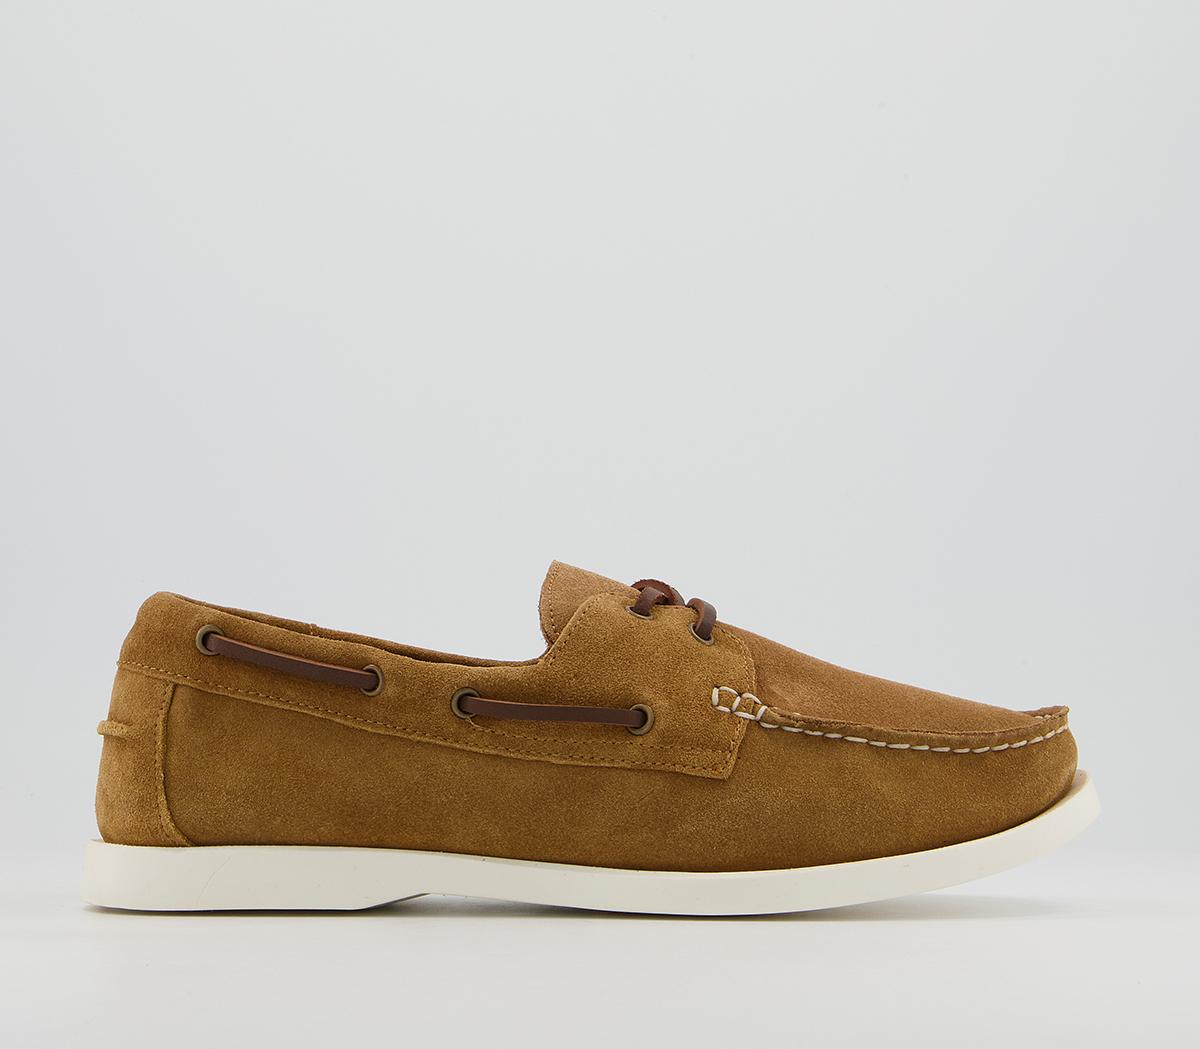 OFFICE Cabin Boat Shoes Tan Suede Men's Casual Shoes